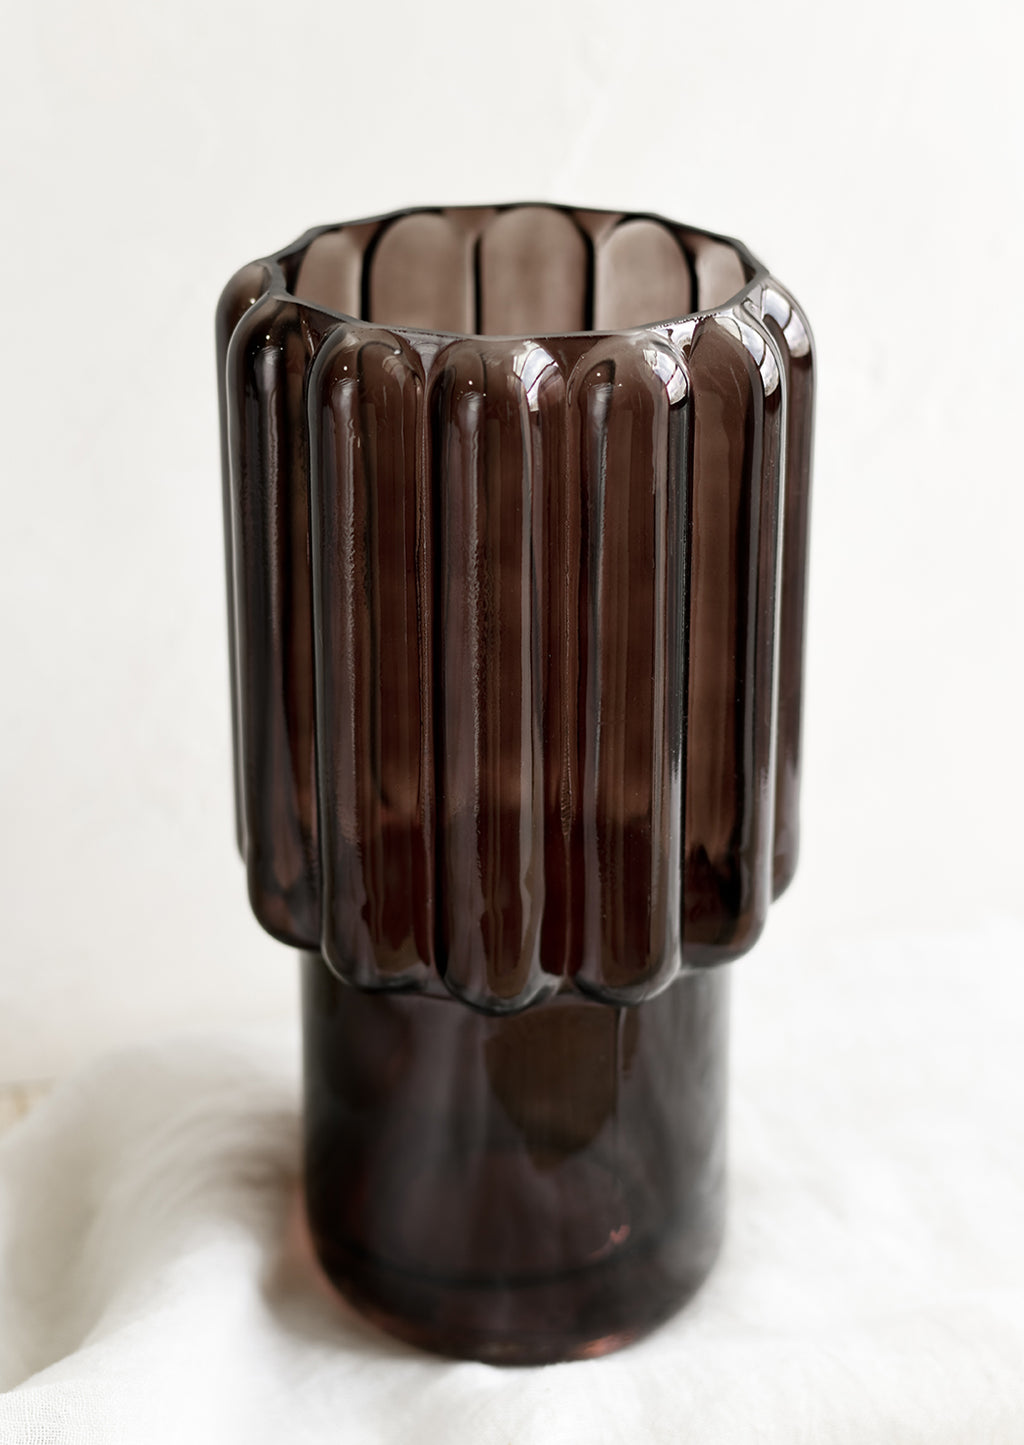 3: A large glass vase in dark brown with fluted texture.